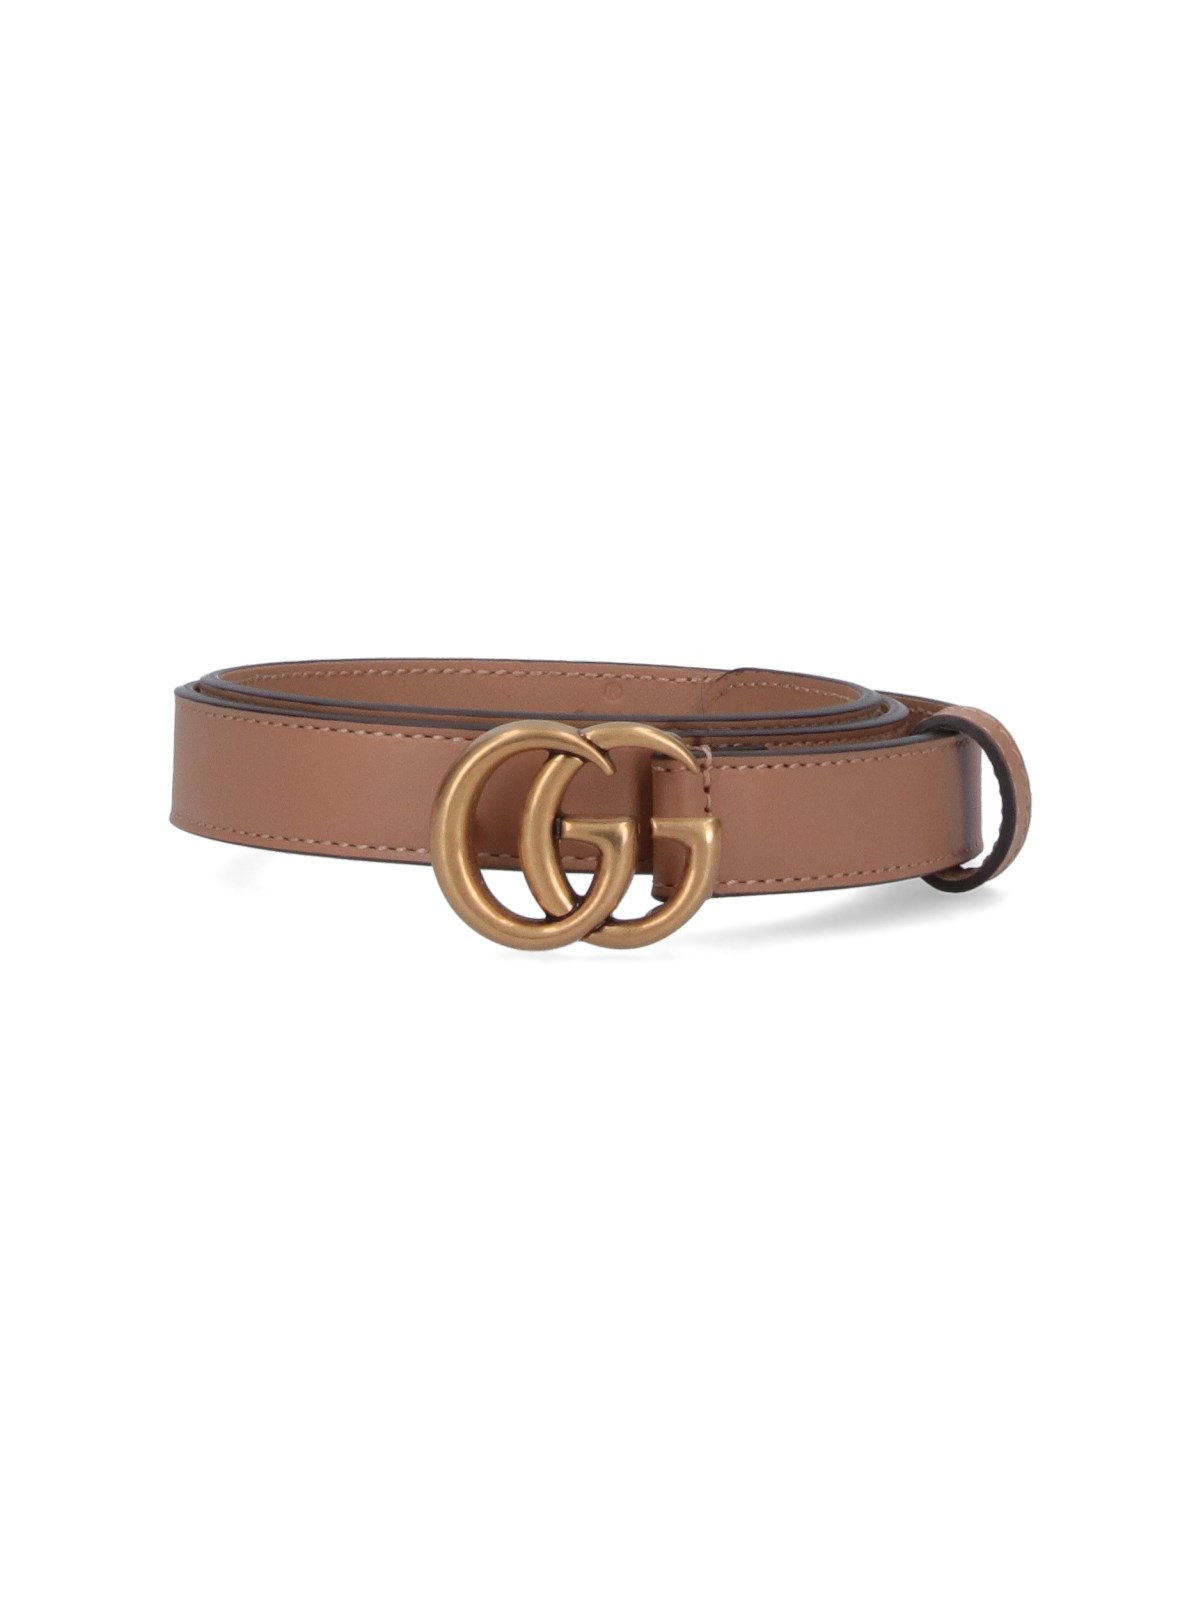 Gucci Gg Thin Belt In Brown